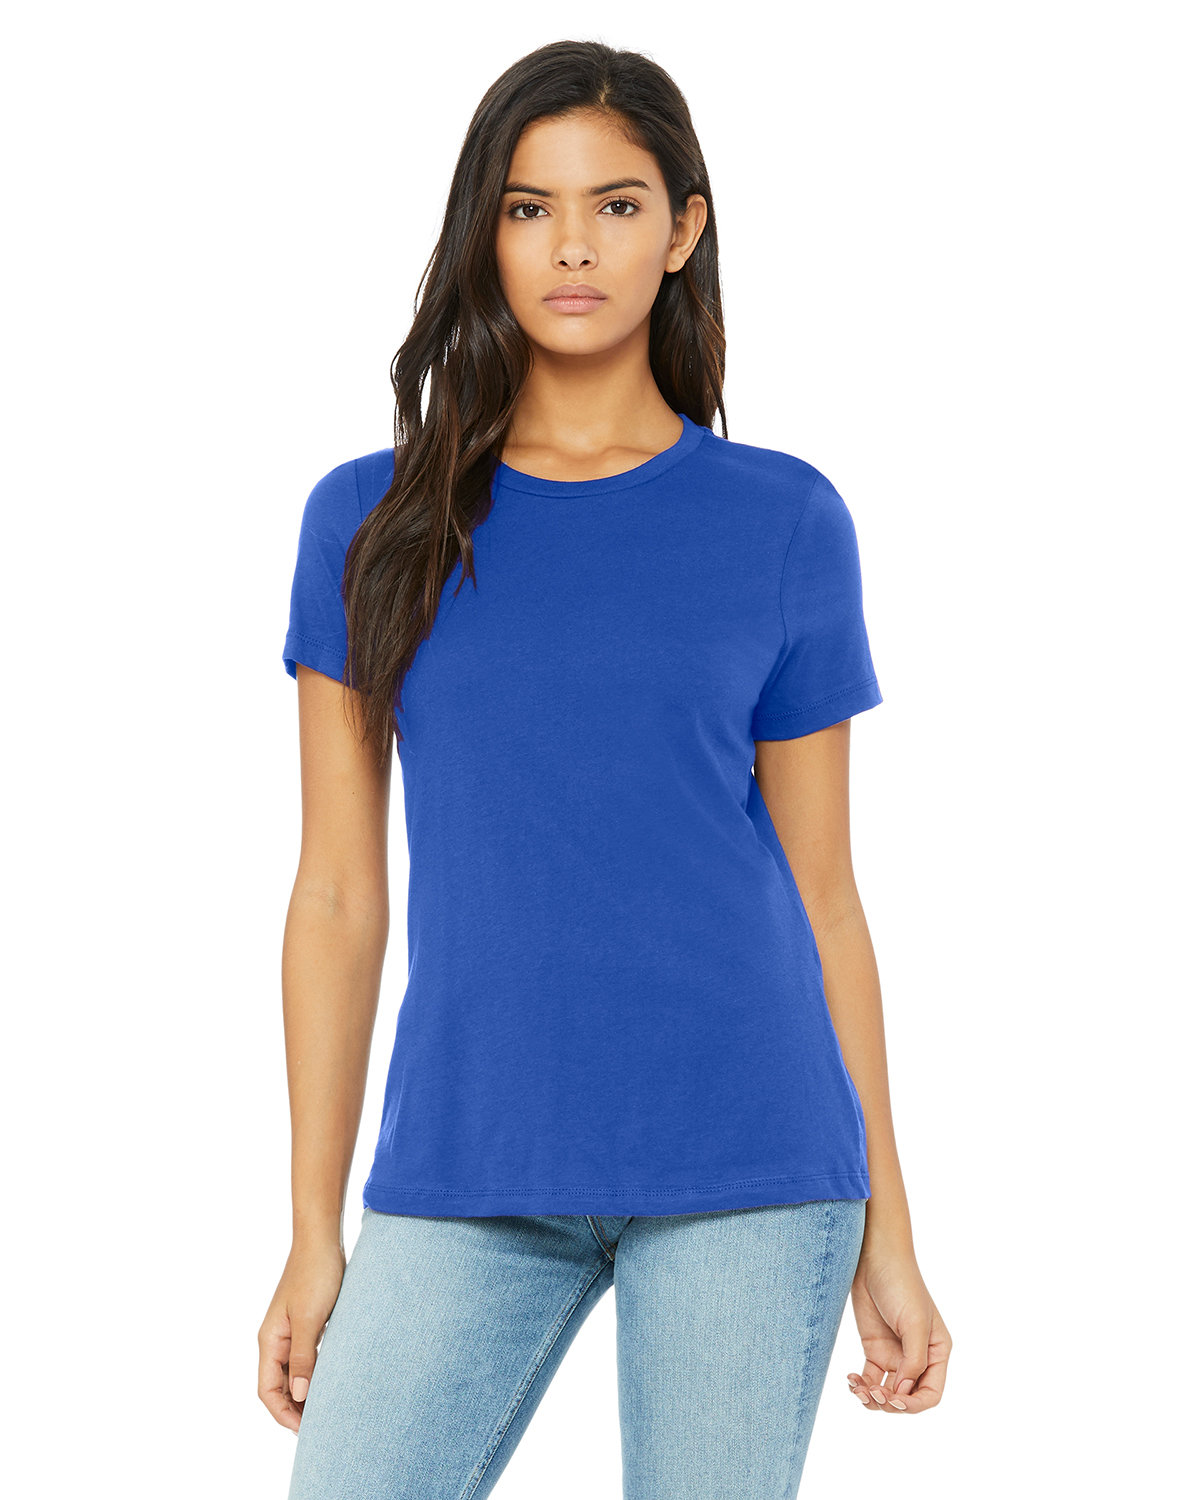 Bella + Canvas Ladies' Relaxed Jersey Short-Sleeve T-Shirt TRUE ROYAL 